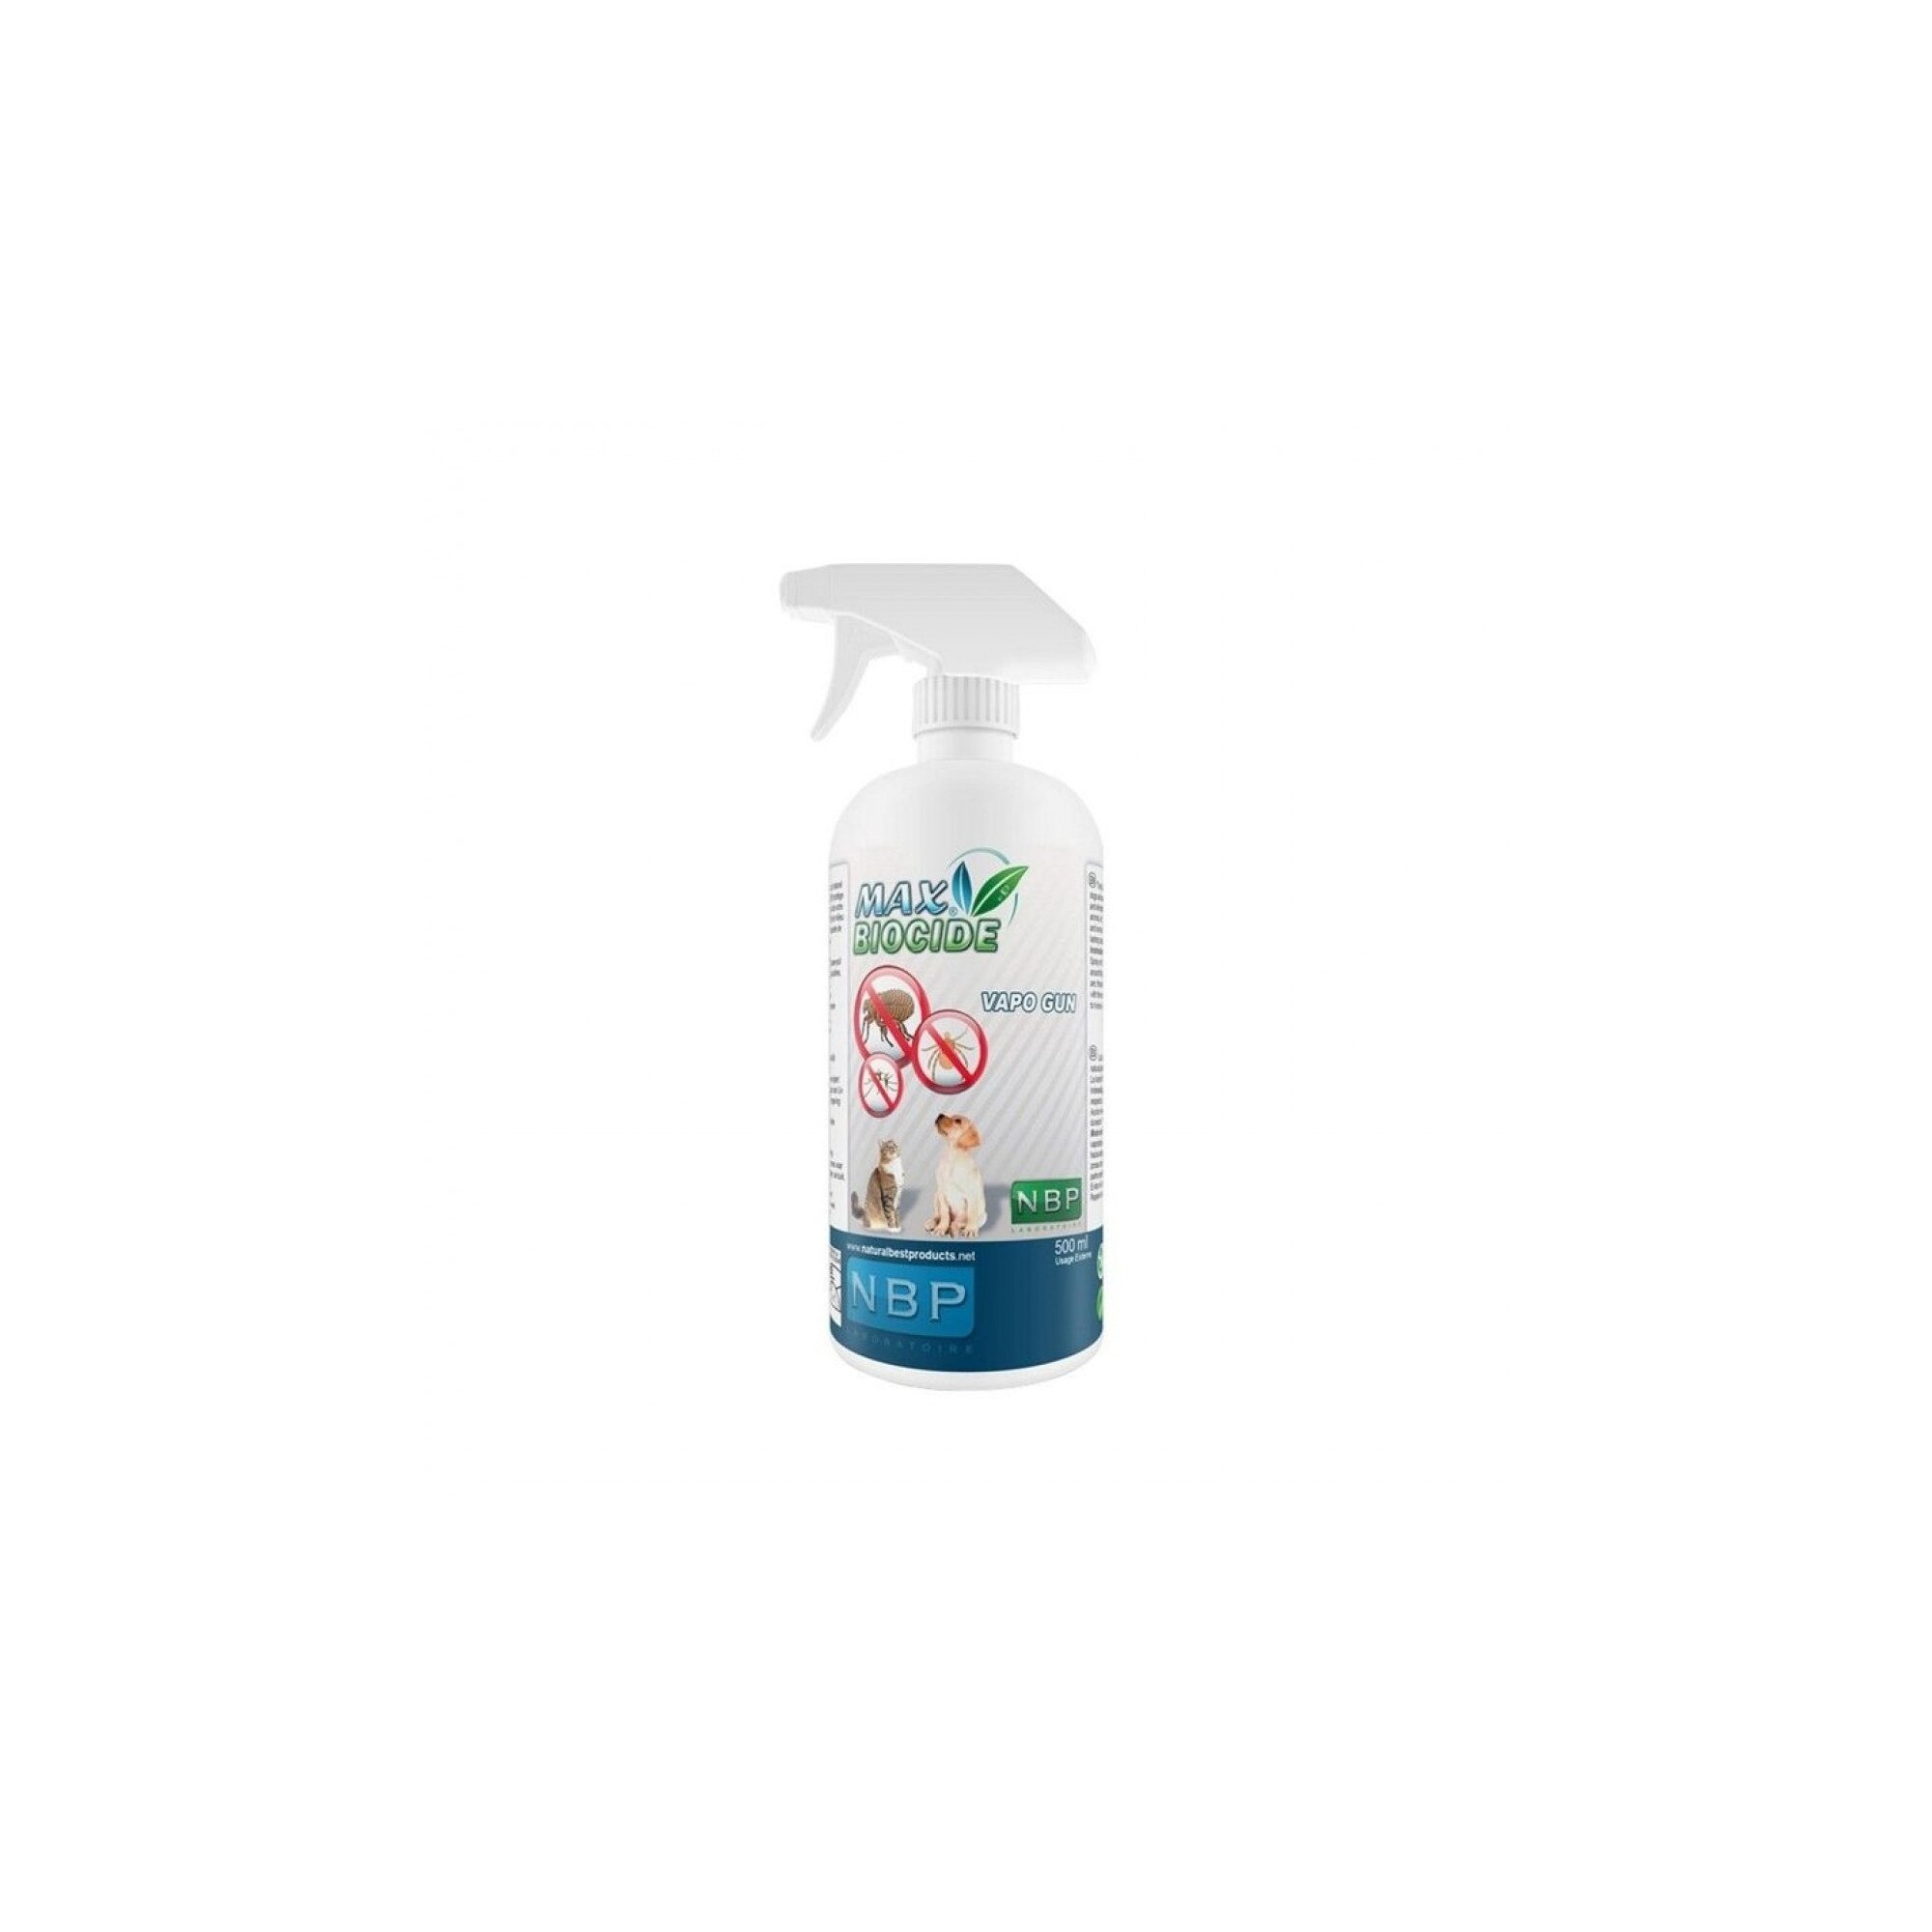 Antiparasitic spray for dogs and cats 500ml